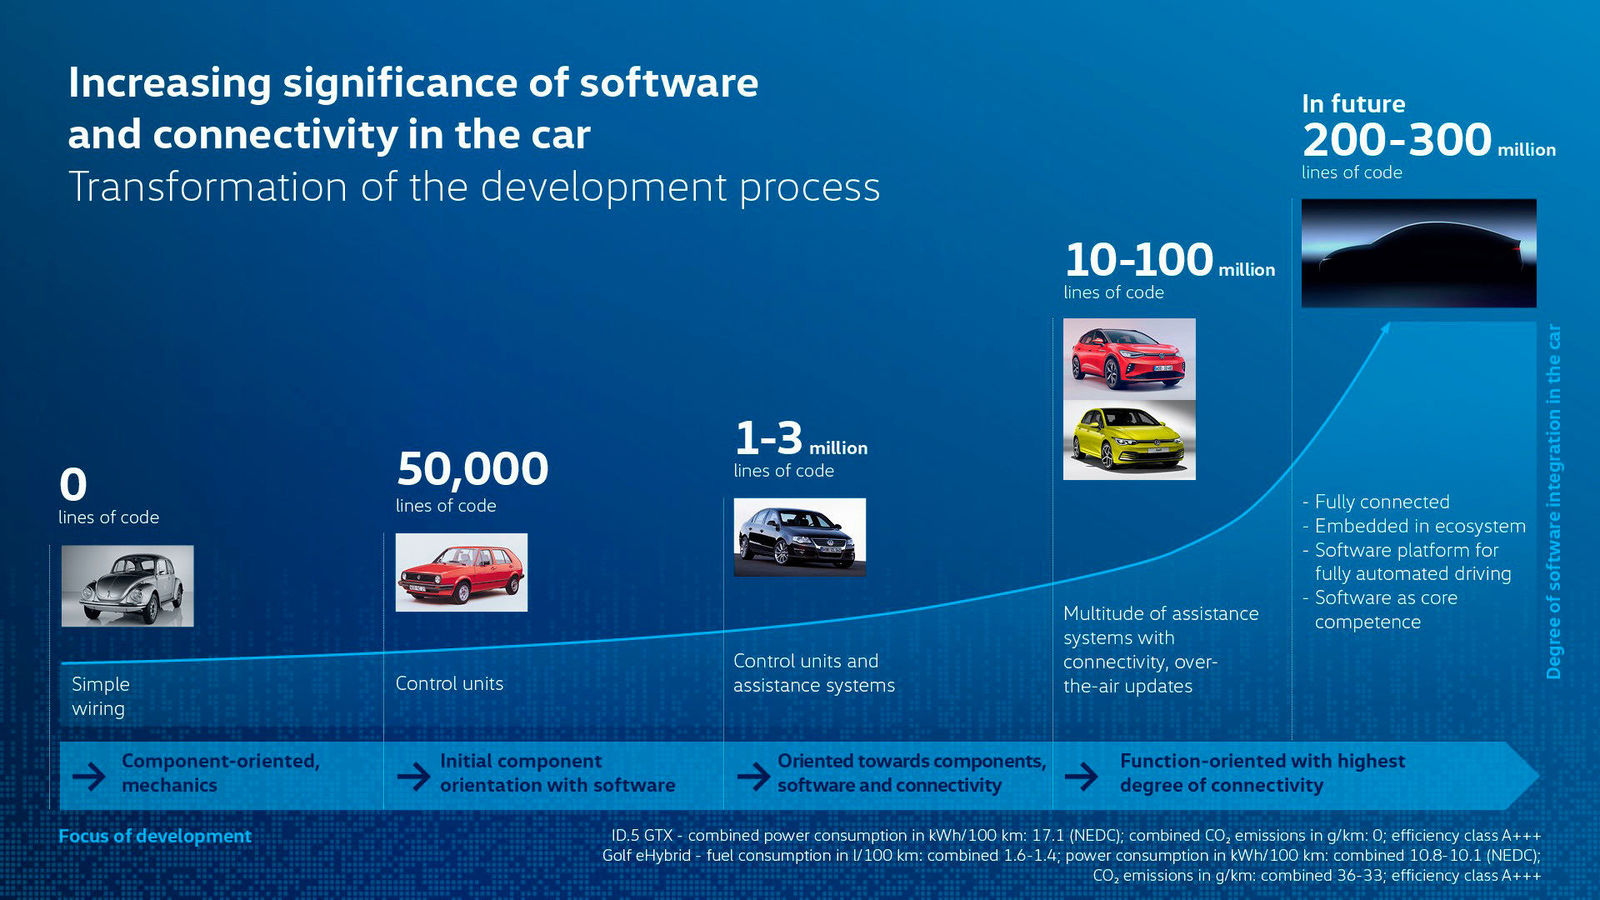 Volkswagen realigns Technical Development: shorter product cycles and faster digital offerings